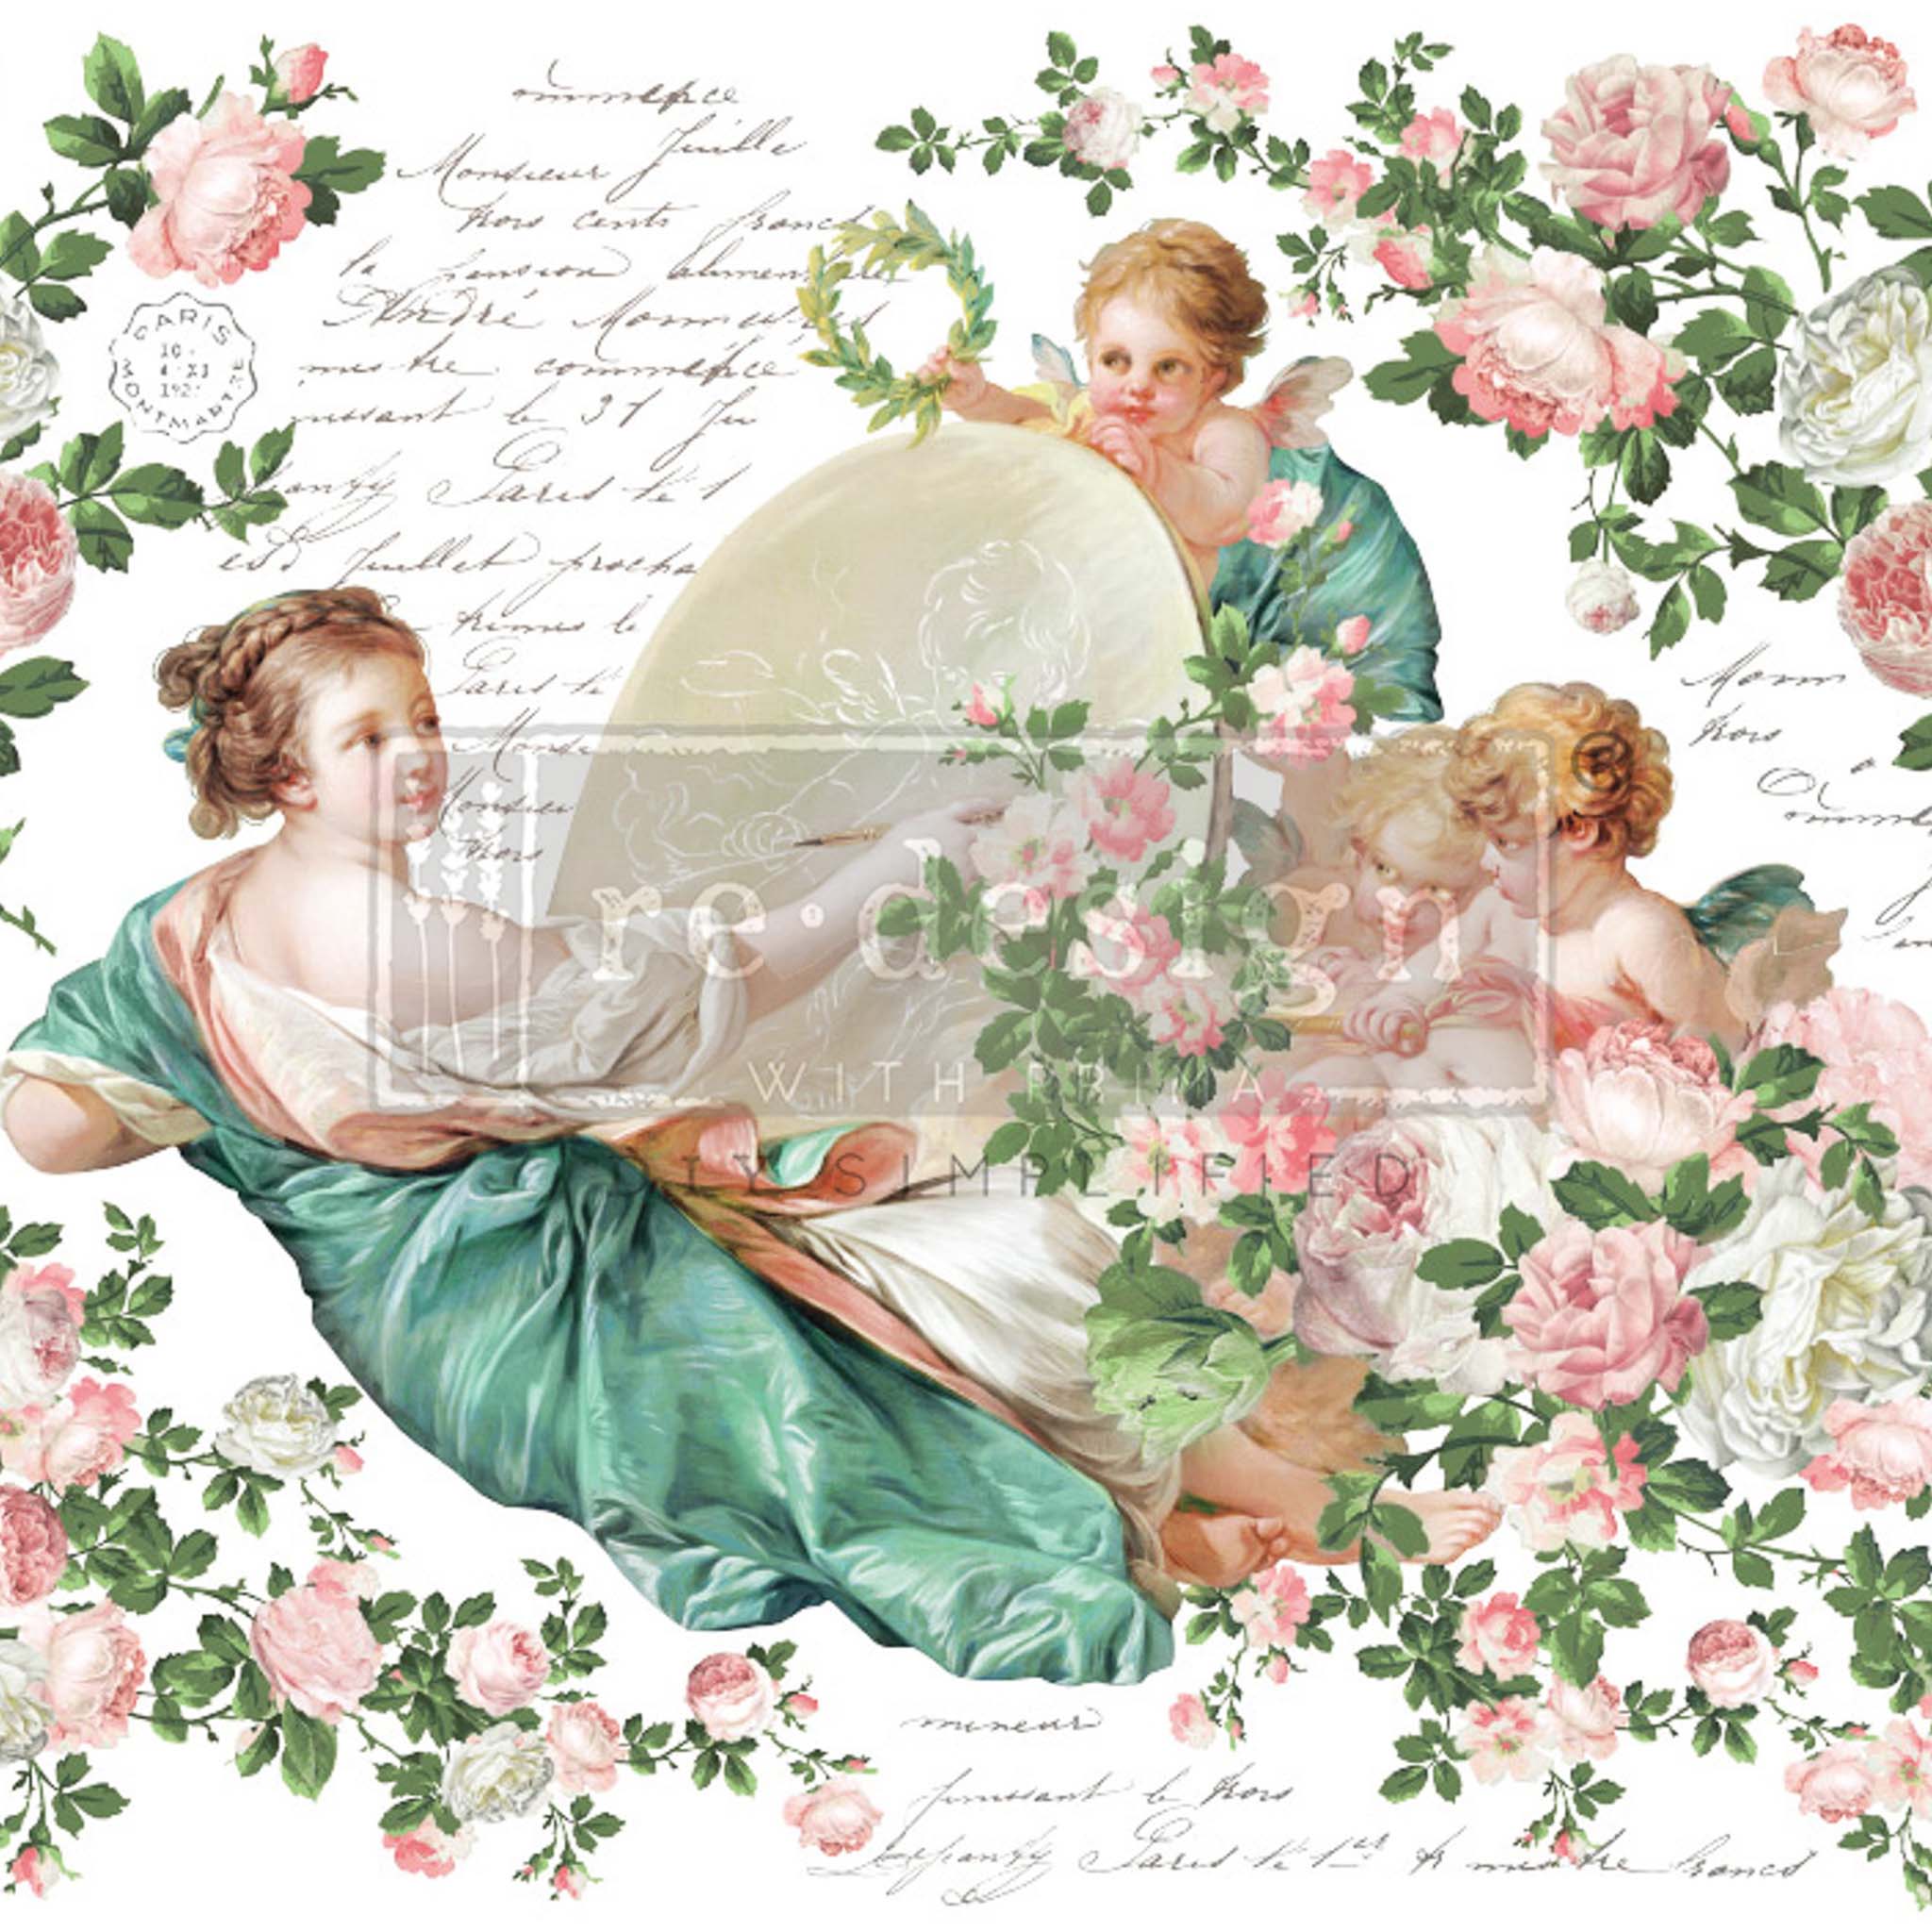 Close-up of a rub-on transfer design that features cherubic figures, elegant script, and delicate pink roses.